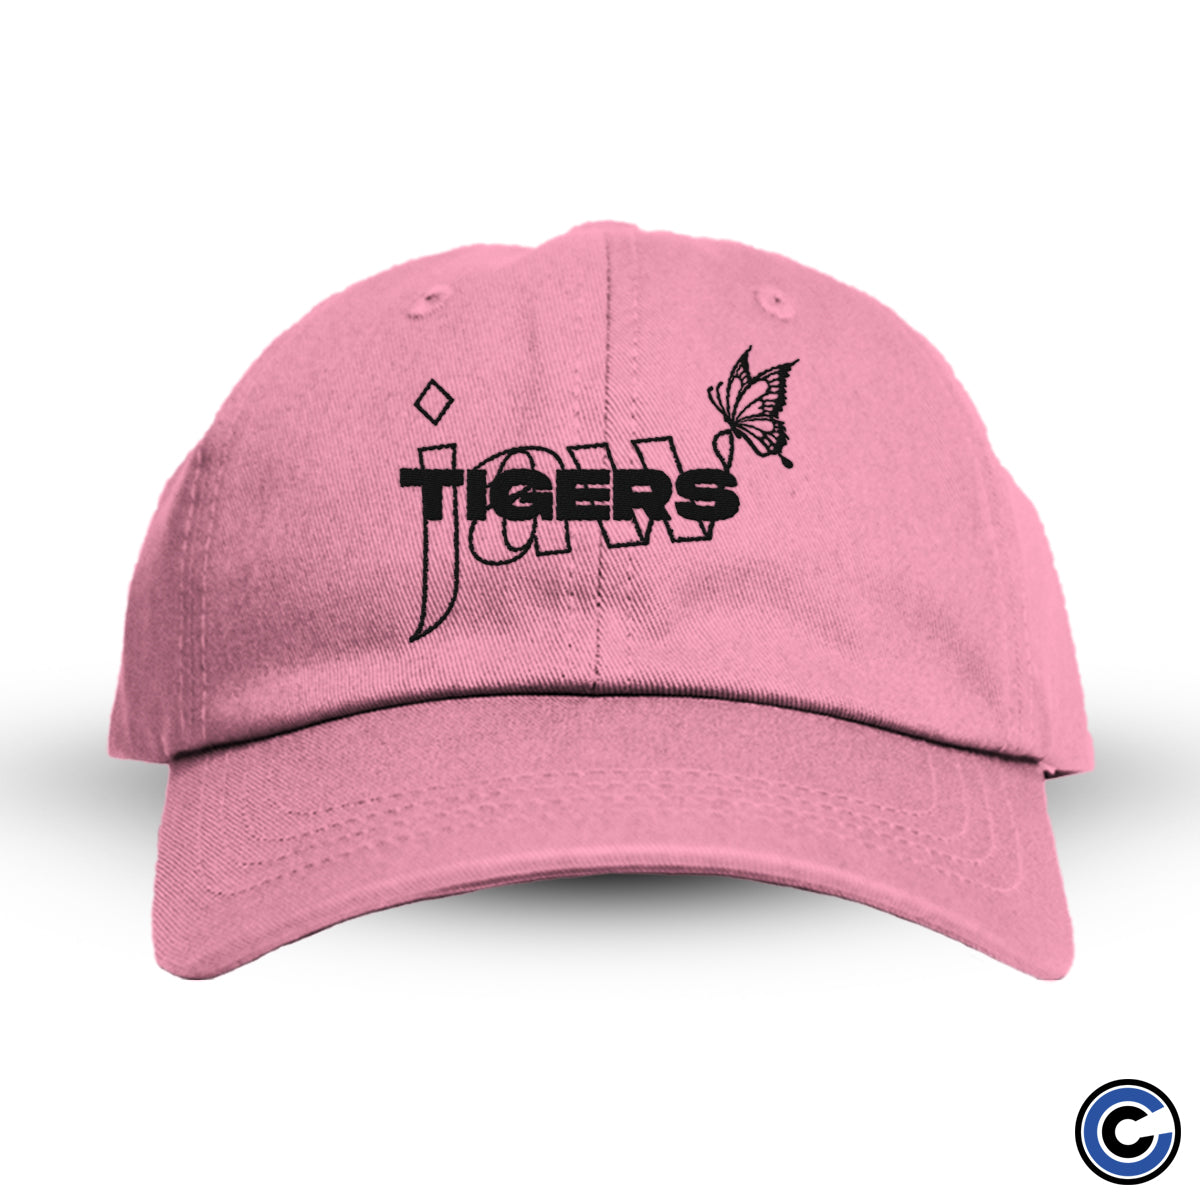 Tigers Jaw "Overlap" Hat